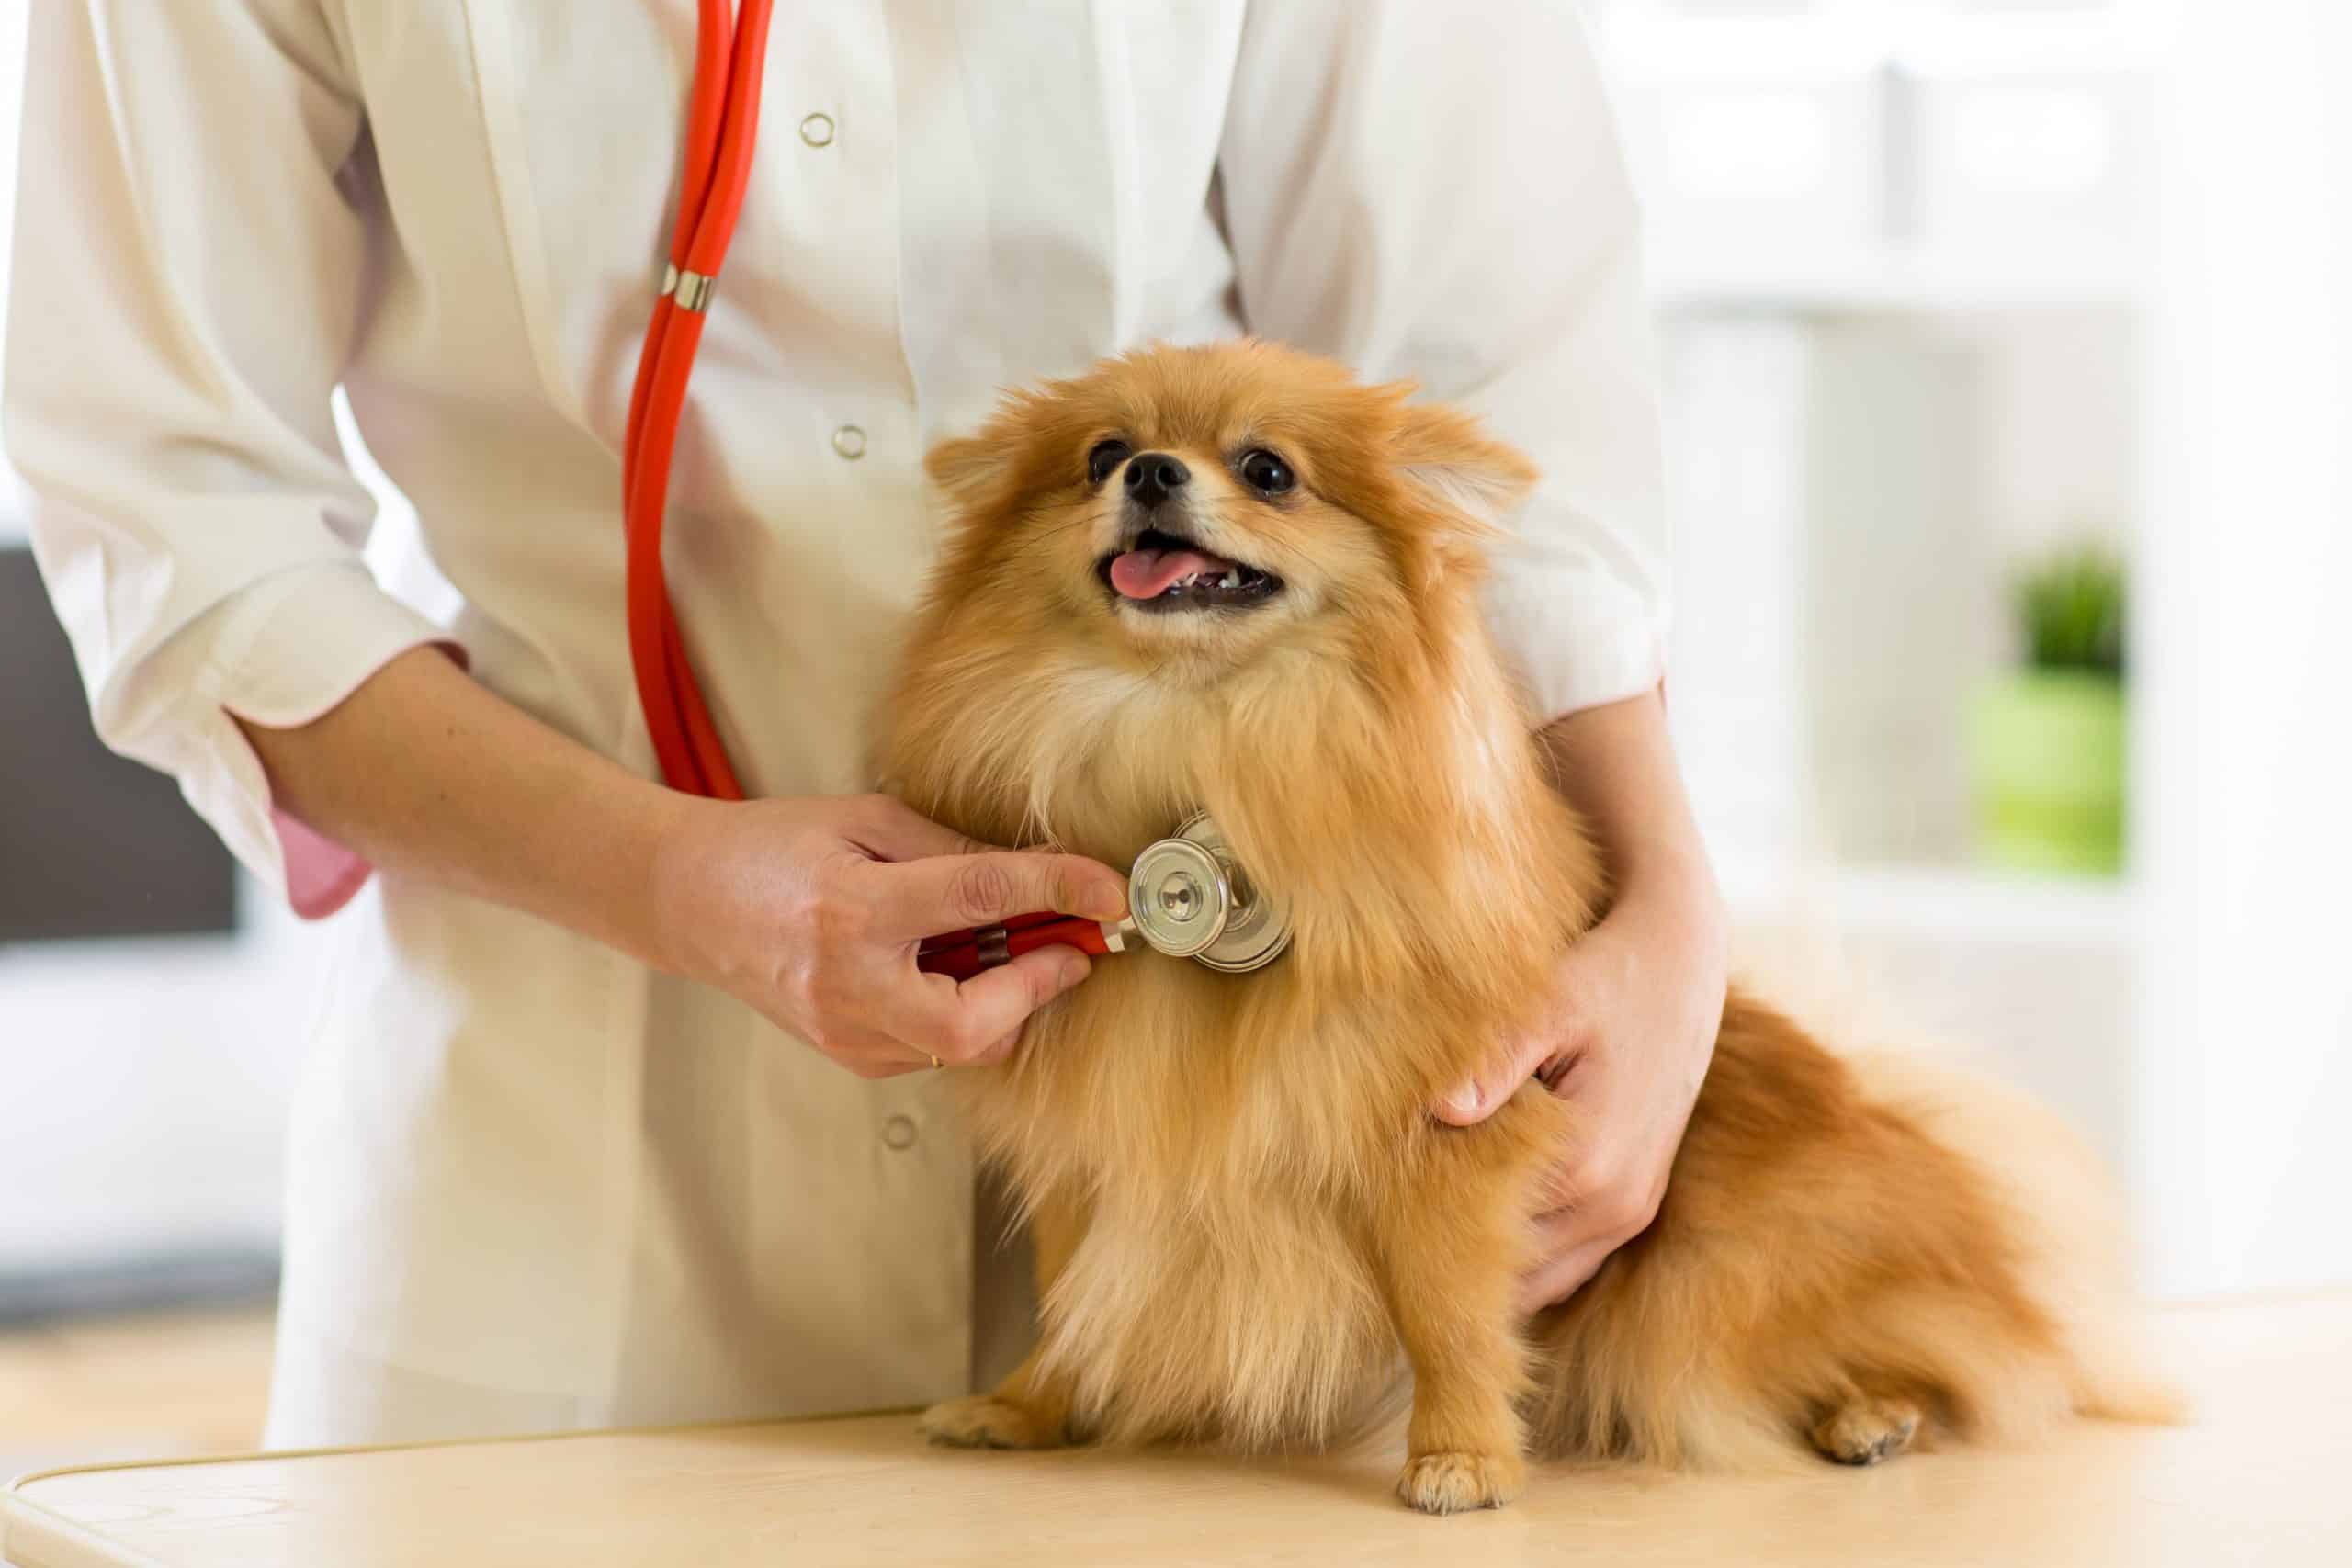 Veterinarian listens to a pomeranian's heart. Heart disease is one of the most common illnesses small dogs experience.